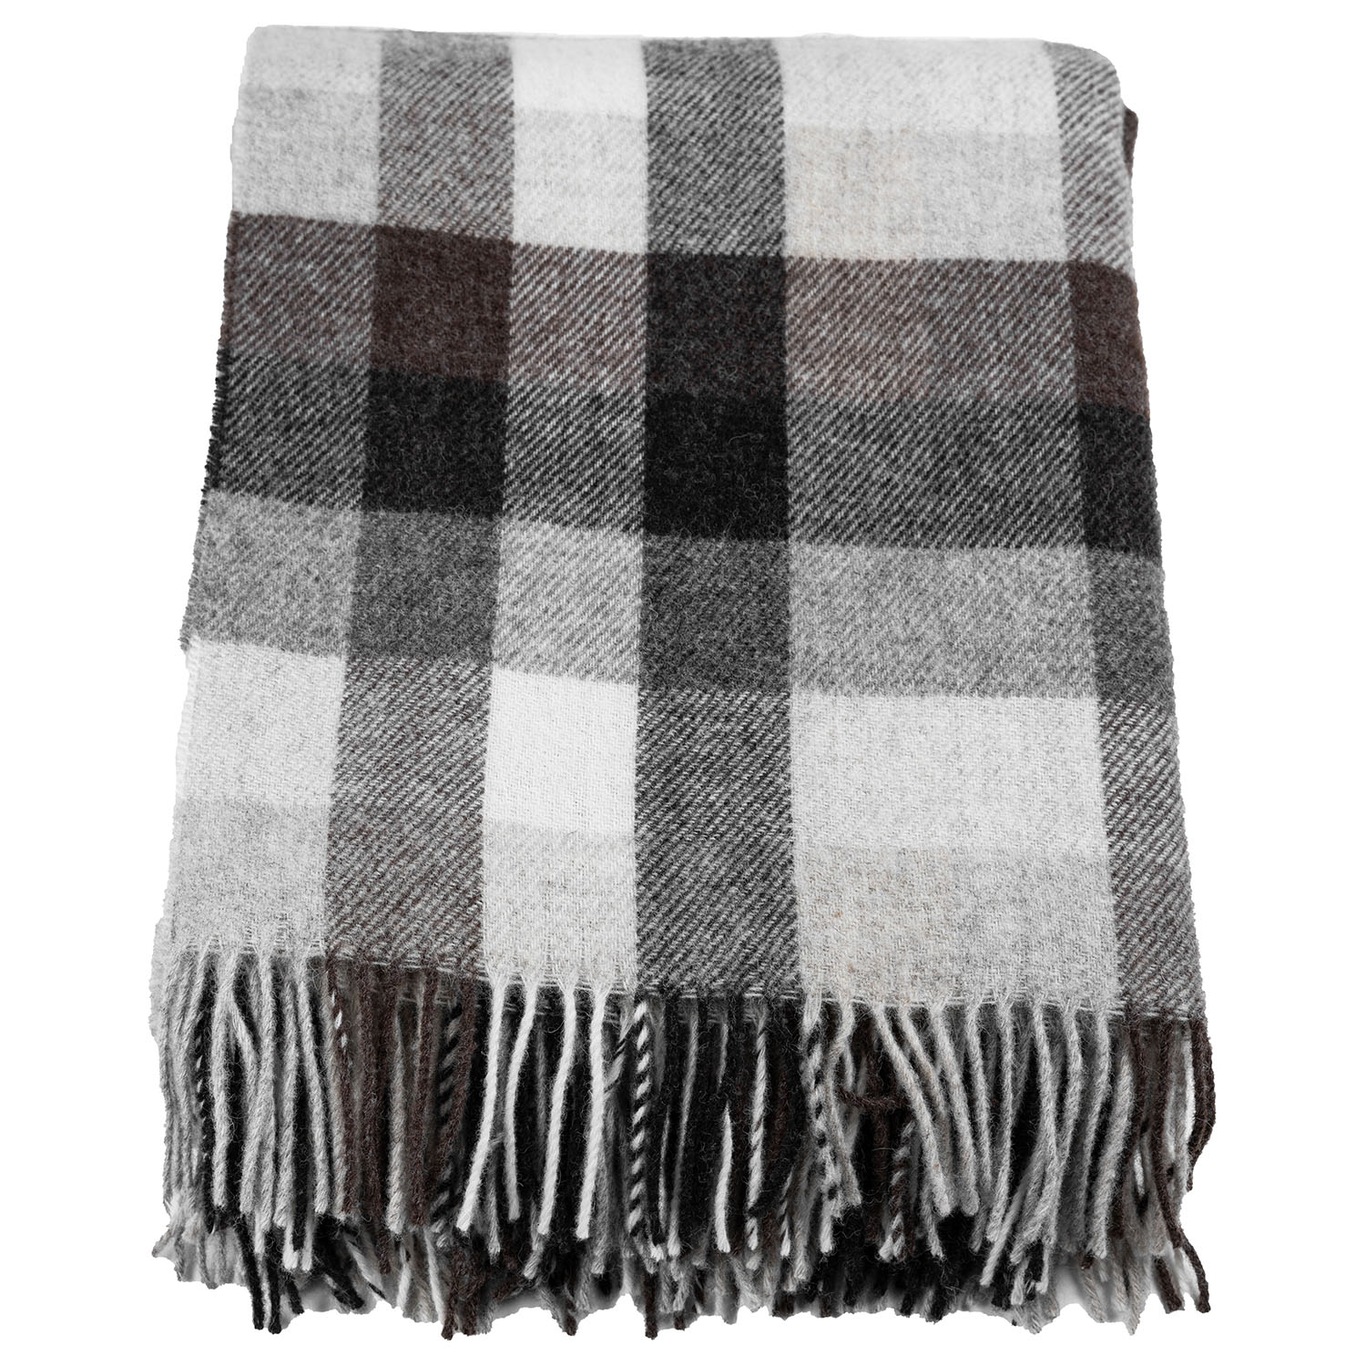 Checked Wool Blanket Brown/Grey / Off-white, 130x170 cm